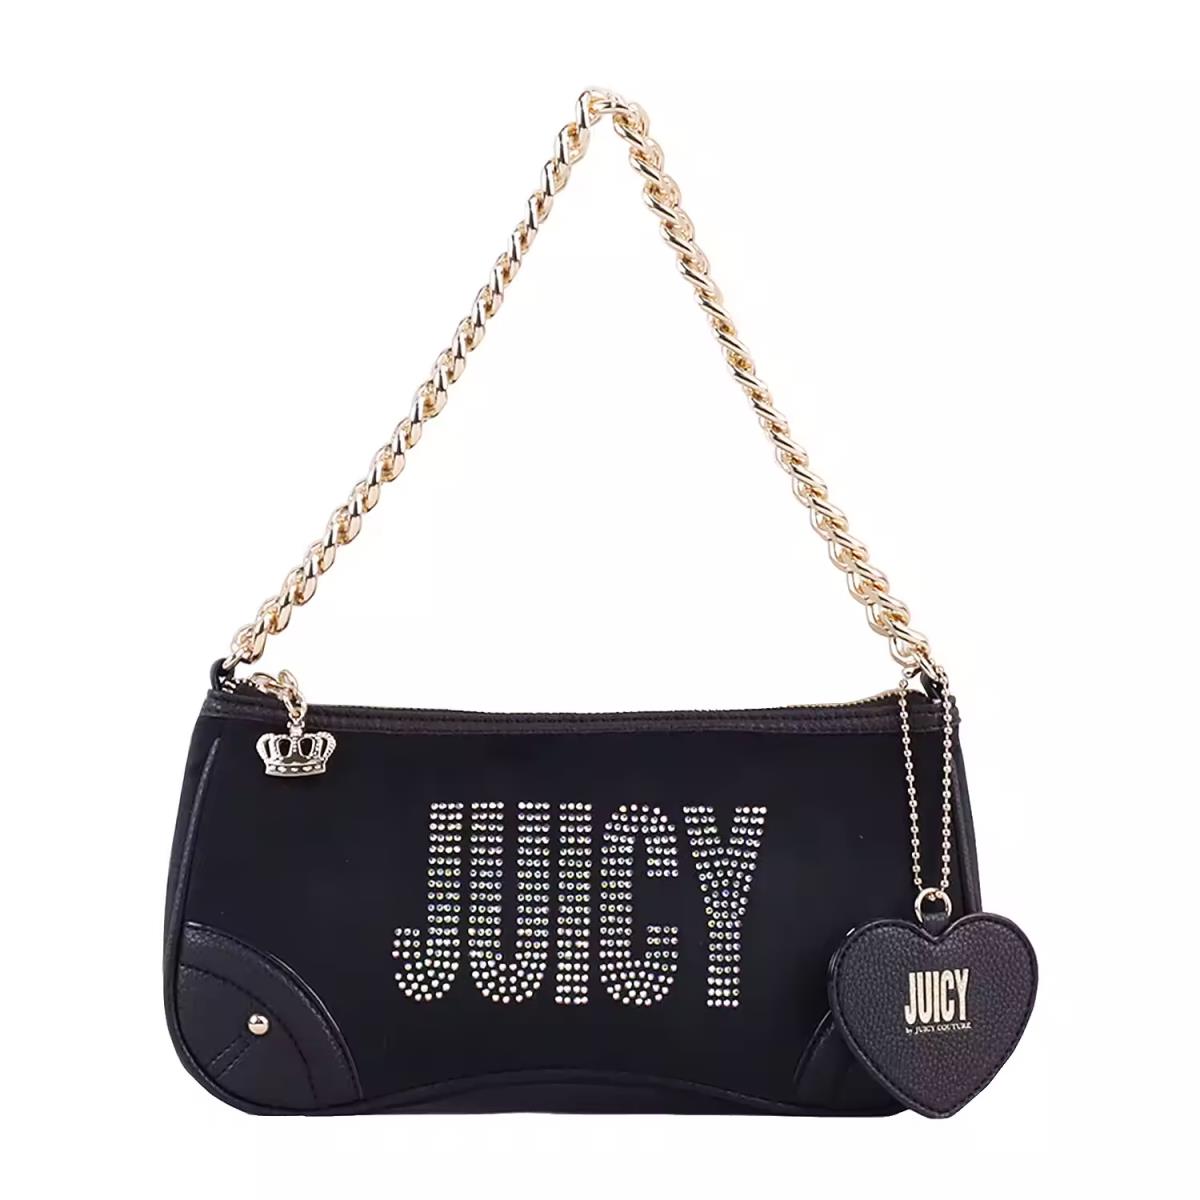 Juicy By Juicy Couture Glitzed Crystals Small Shoulder Bag Black Velour - Handle/Strap: Gold, Hardware: Gold, Exterior: Black